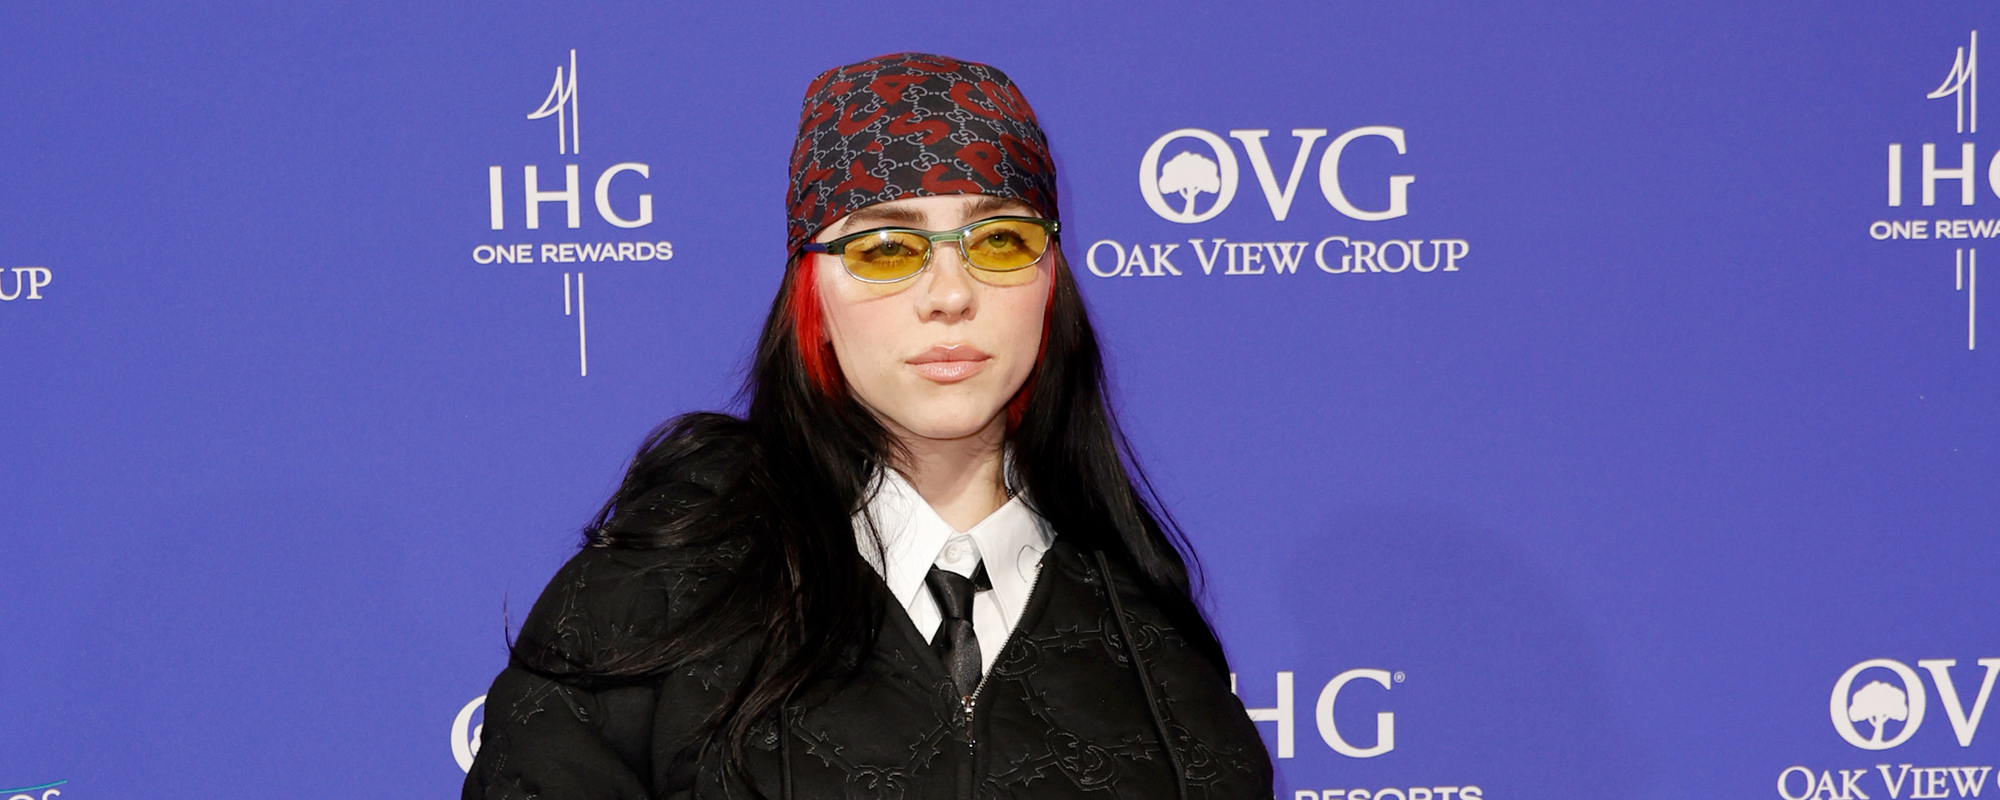 Billie Eilish Discusses the Complicated Dynamic of Her Impact on Fans: “I Didn’t Deserve To Help You”